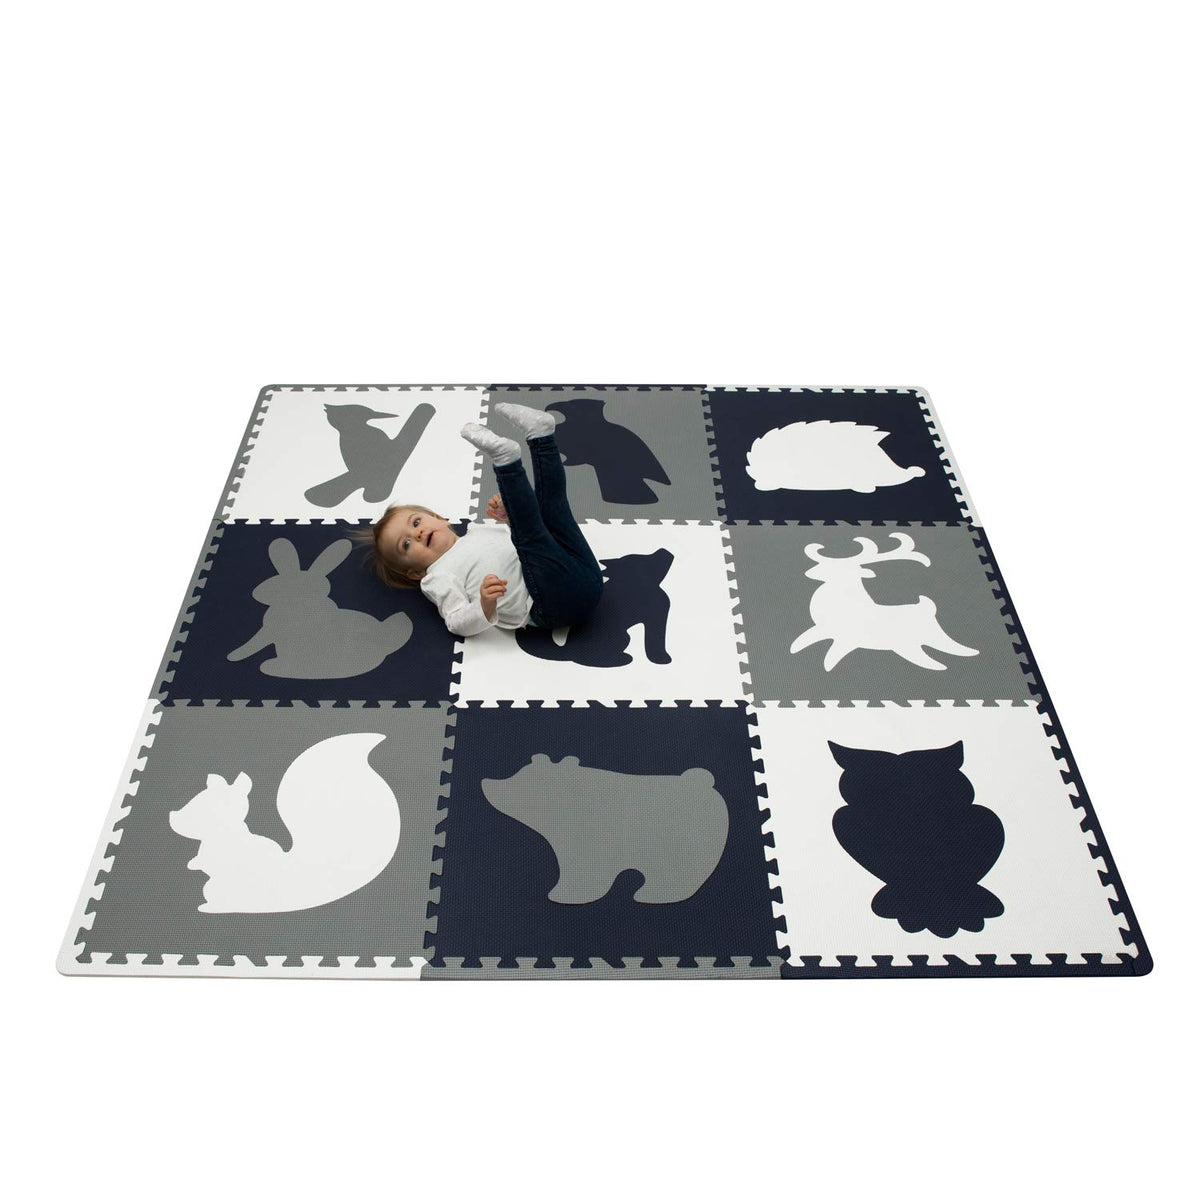 Hakuna Matte Large Foam Play Mats for Babies 1.8 x 1.8 m - 9 XXL Tiles 60 x 60 cm with Animals - 20% Thicker Baby Playmat for Crawling, Yoga, and Fitness - Non-Toxic, Odourless Puzzle Play Mats